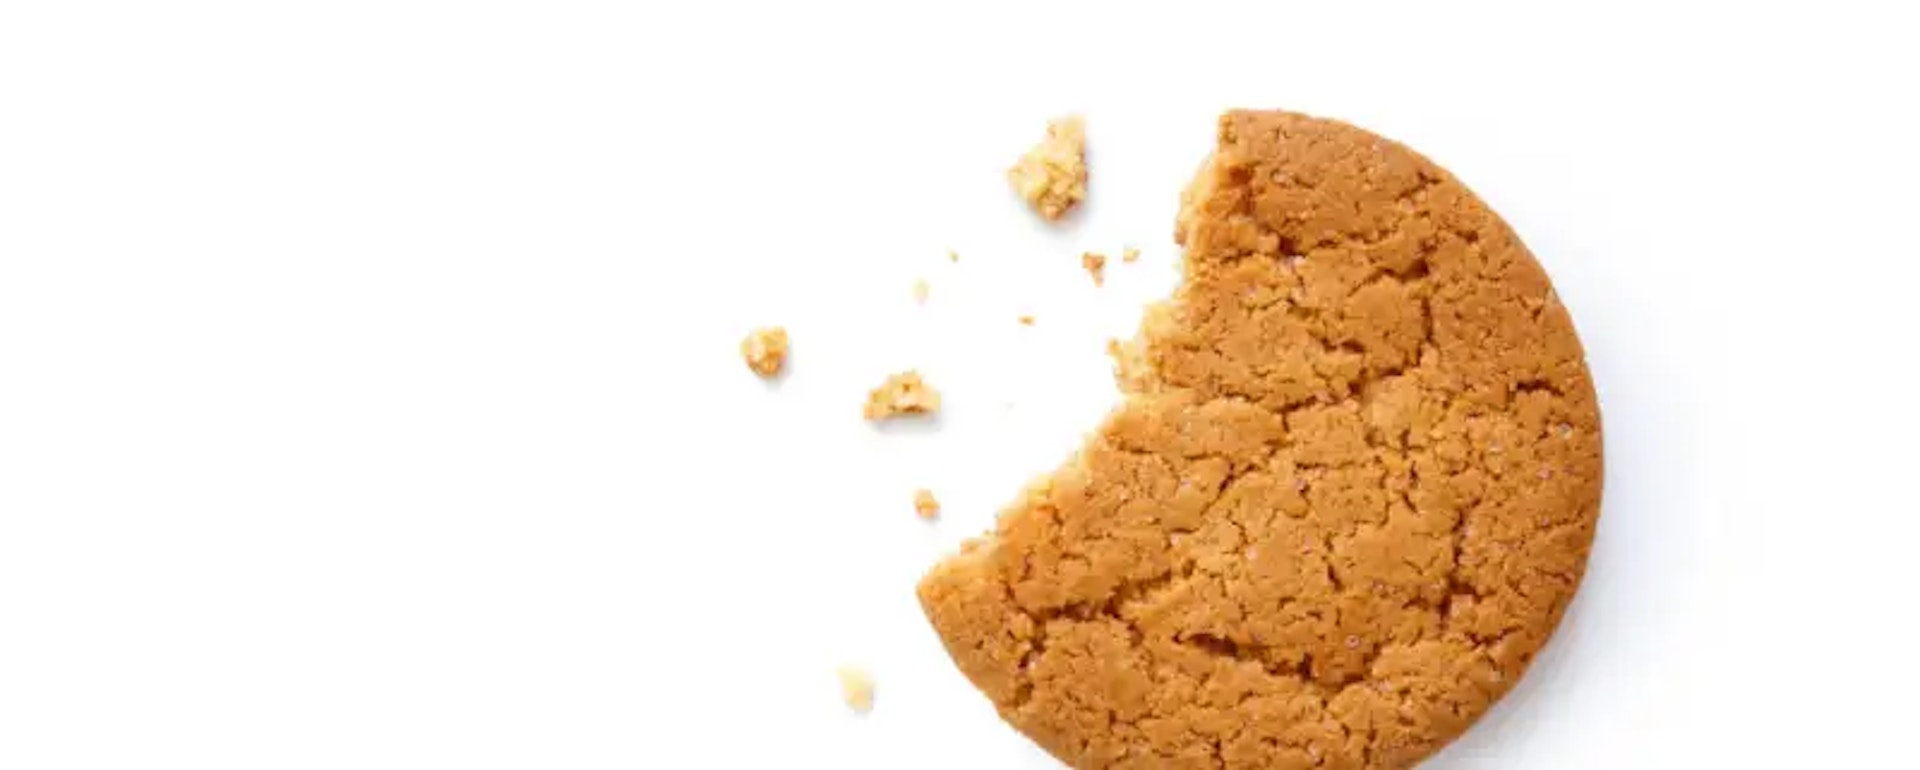 That’s the Way the Cookie Crumbles — What Does it Mean?